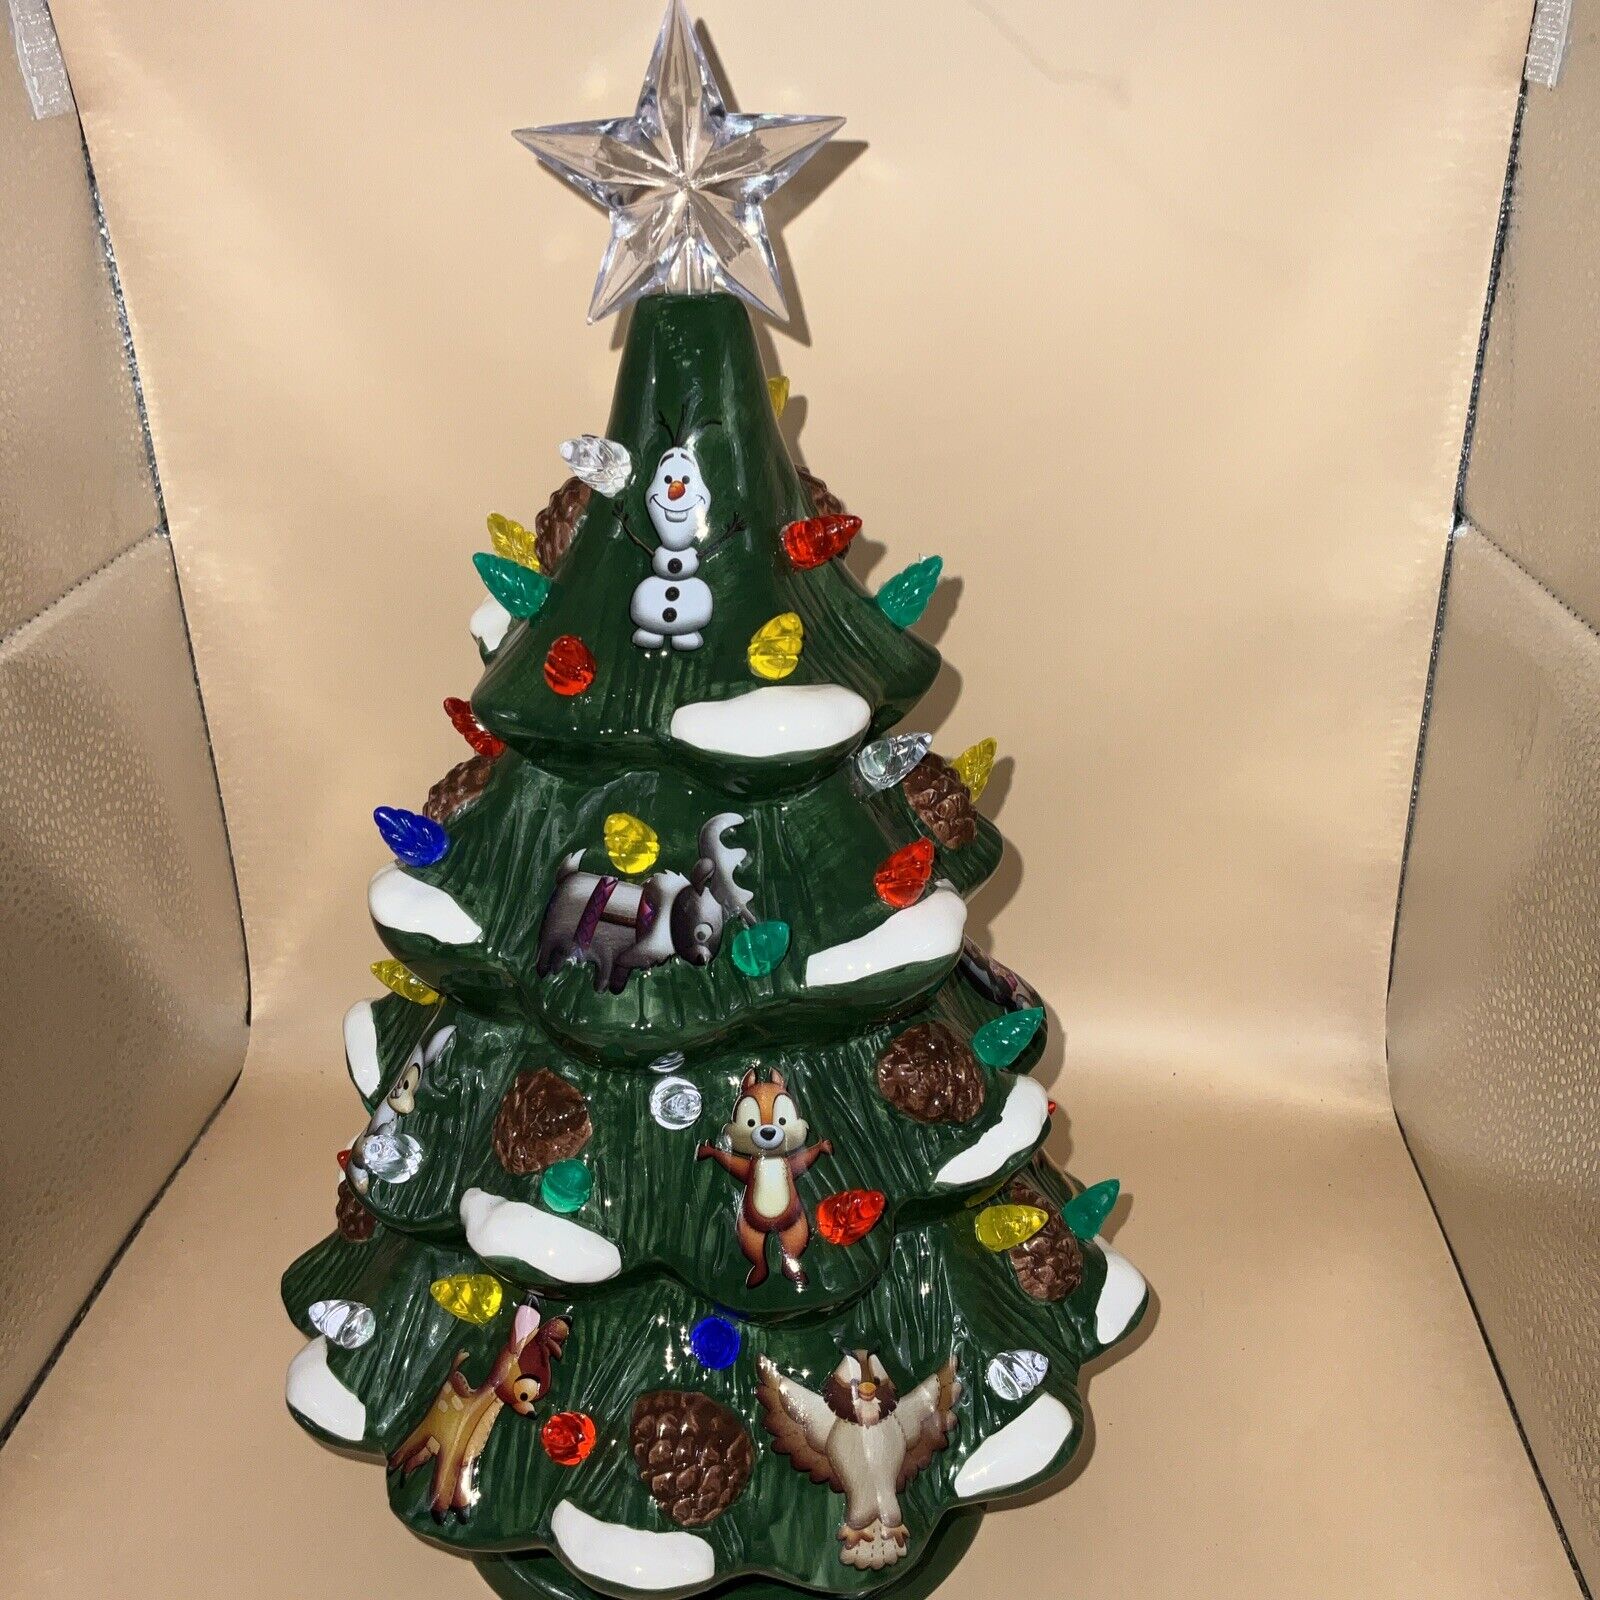 Disney character Christmas tree battery operated with lights